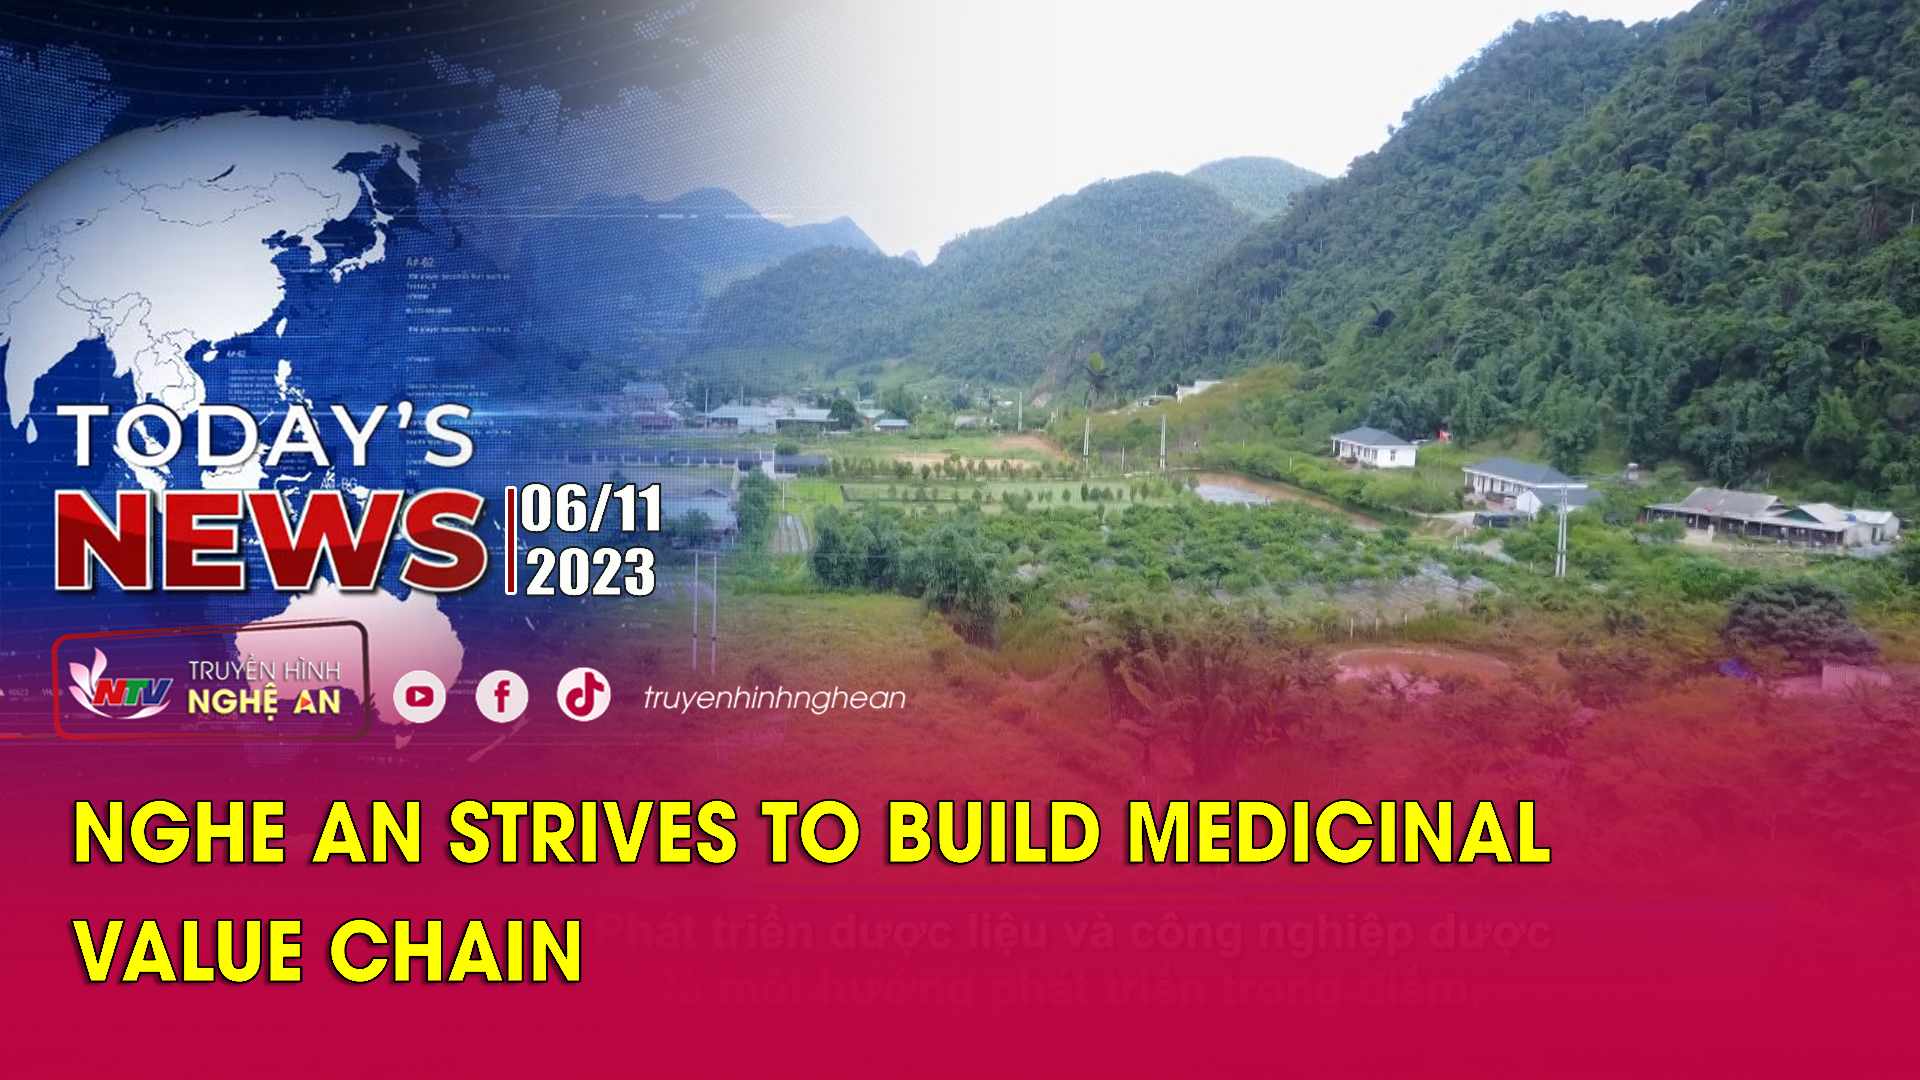 Today's News - 06/11/2023: Nghe An strives to build medicinal value chain